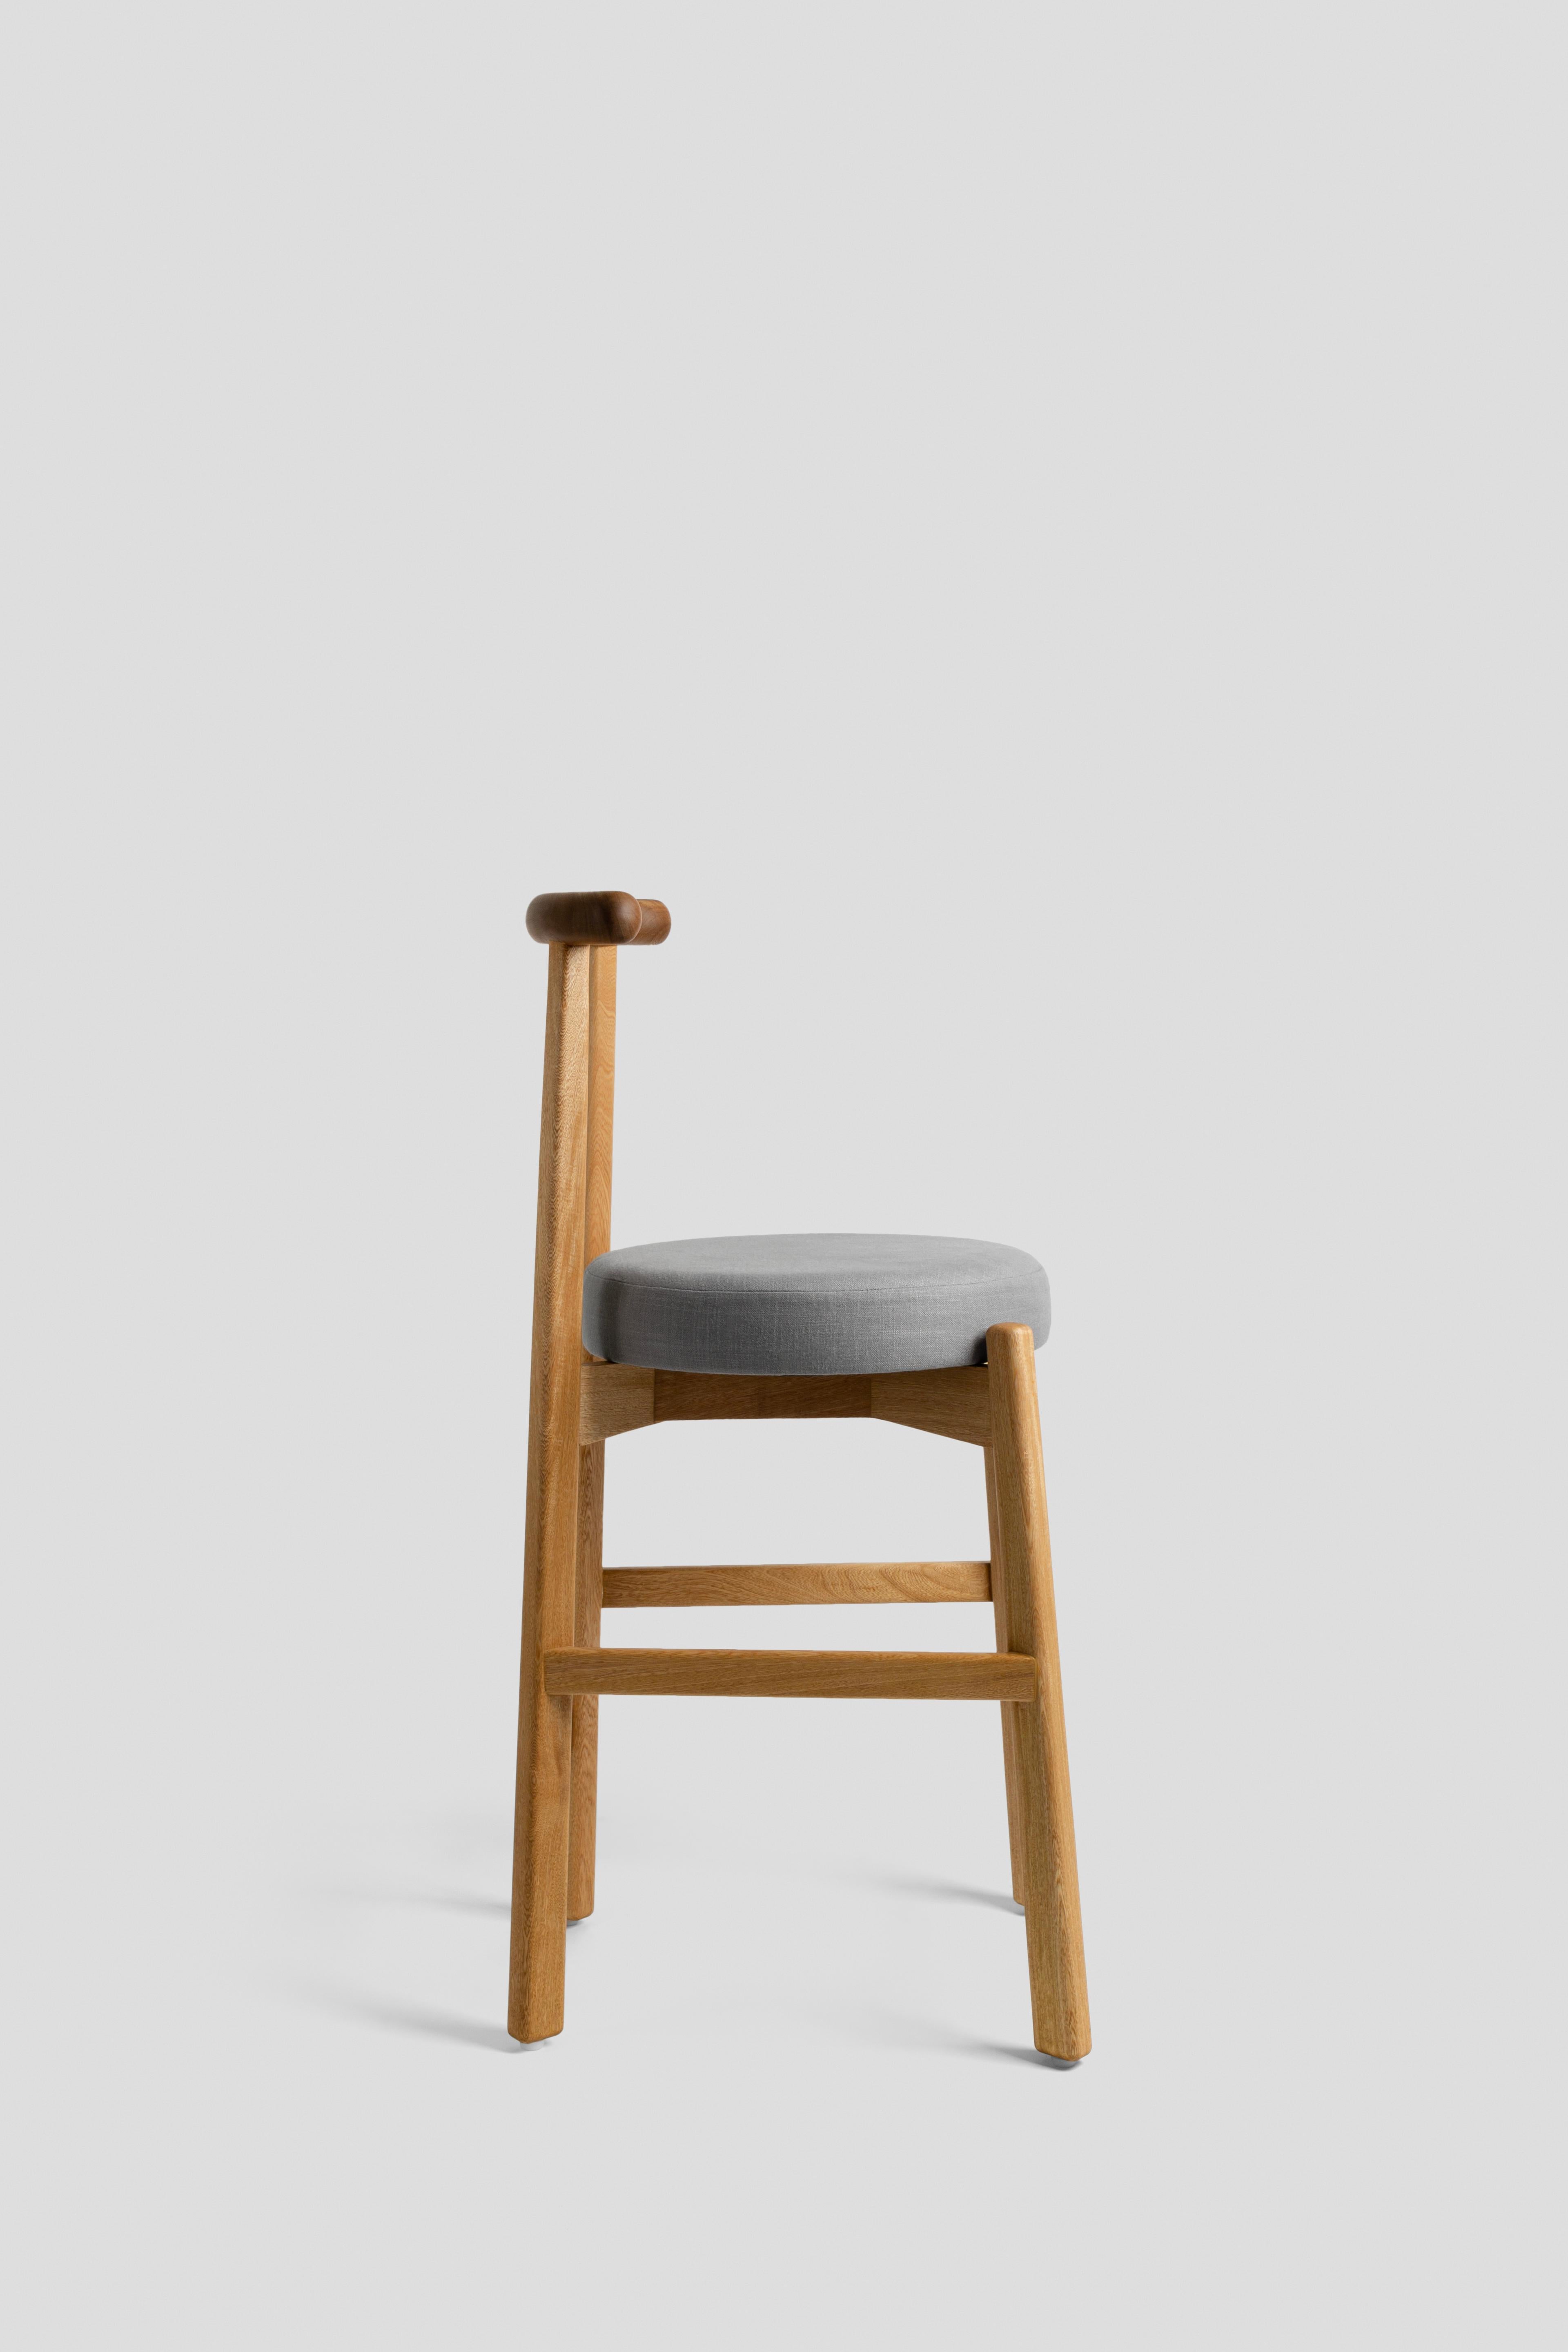 Hardwood Colima Bar Stool, Modern Contemporary Mexican Design For Sale